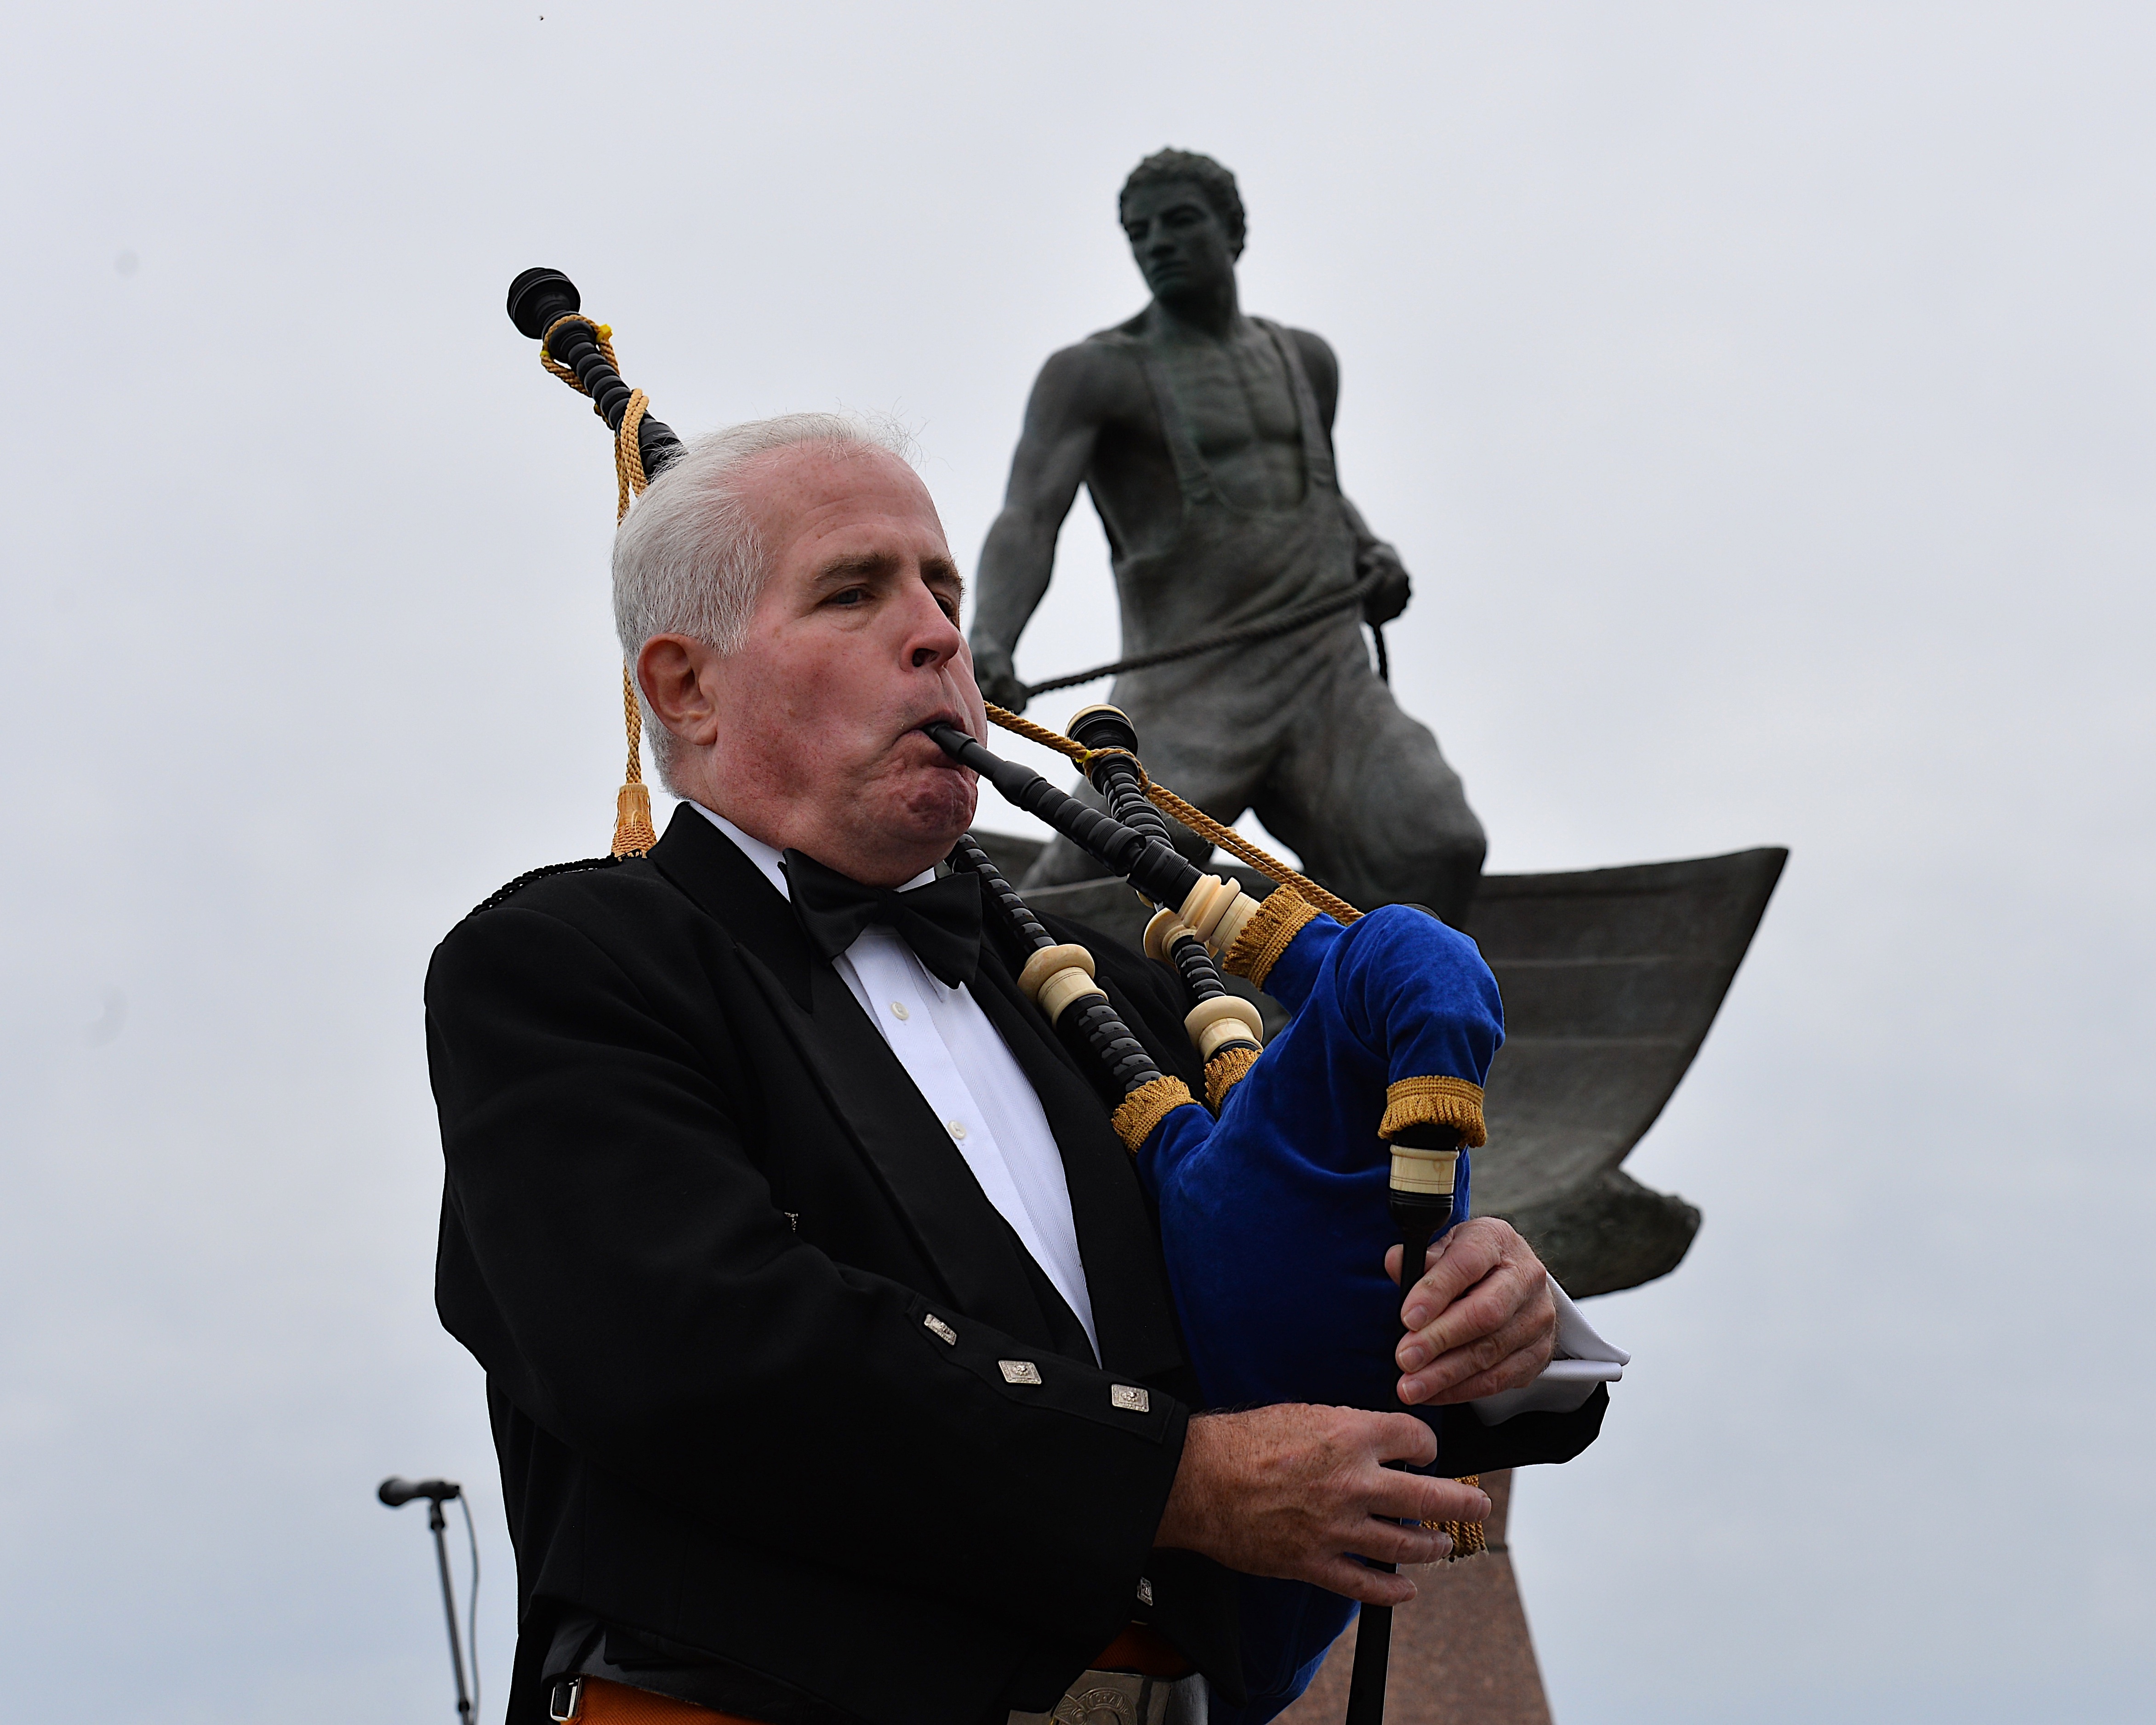 Robert Lynch plays the bagpipes at the ceremony.